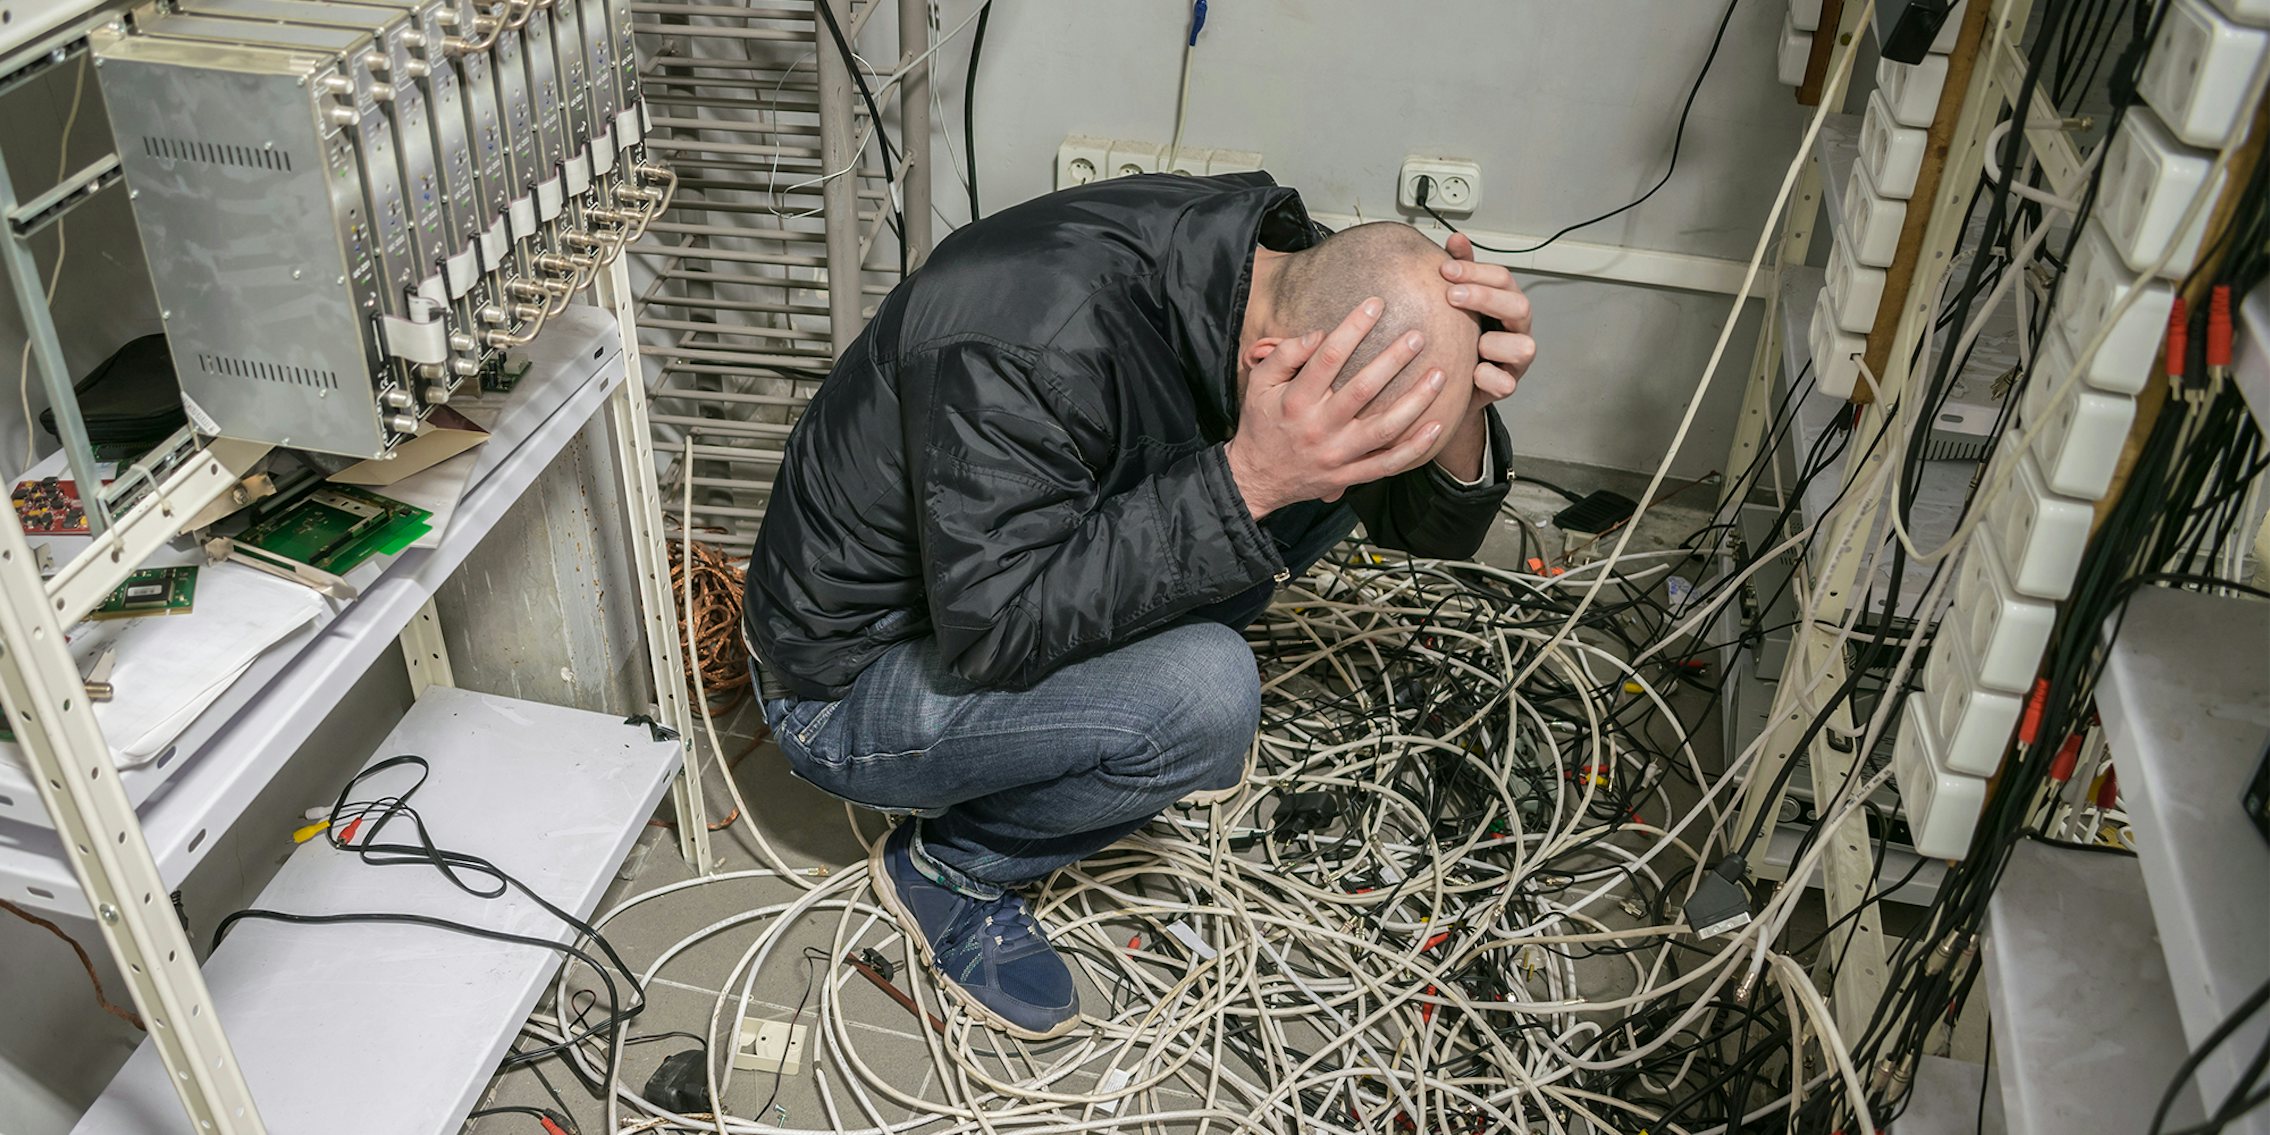 A sad technician sits near a pile of wires and holds his head with his hands in an empty datacenter. The man is in a plundered server room.